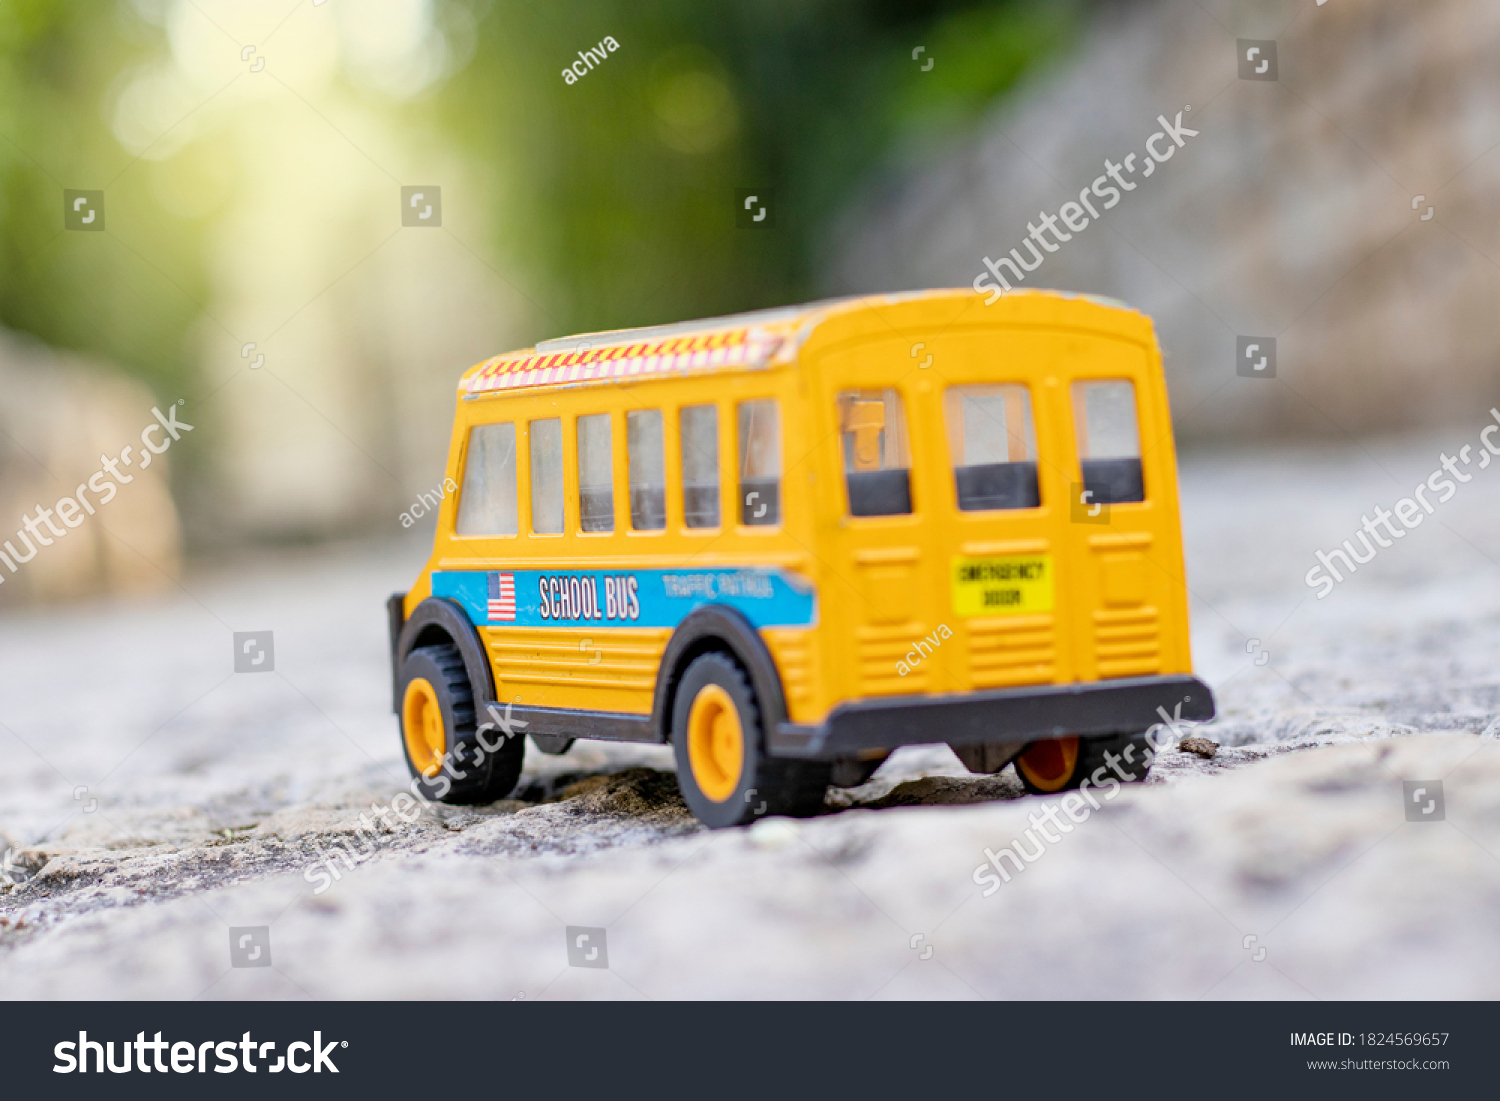 stock-photo-a-student-bus-toy-on-a-sidewalk-in-the-garden-1824569657.jpg